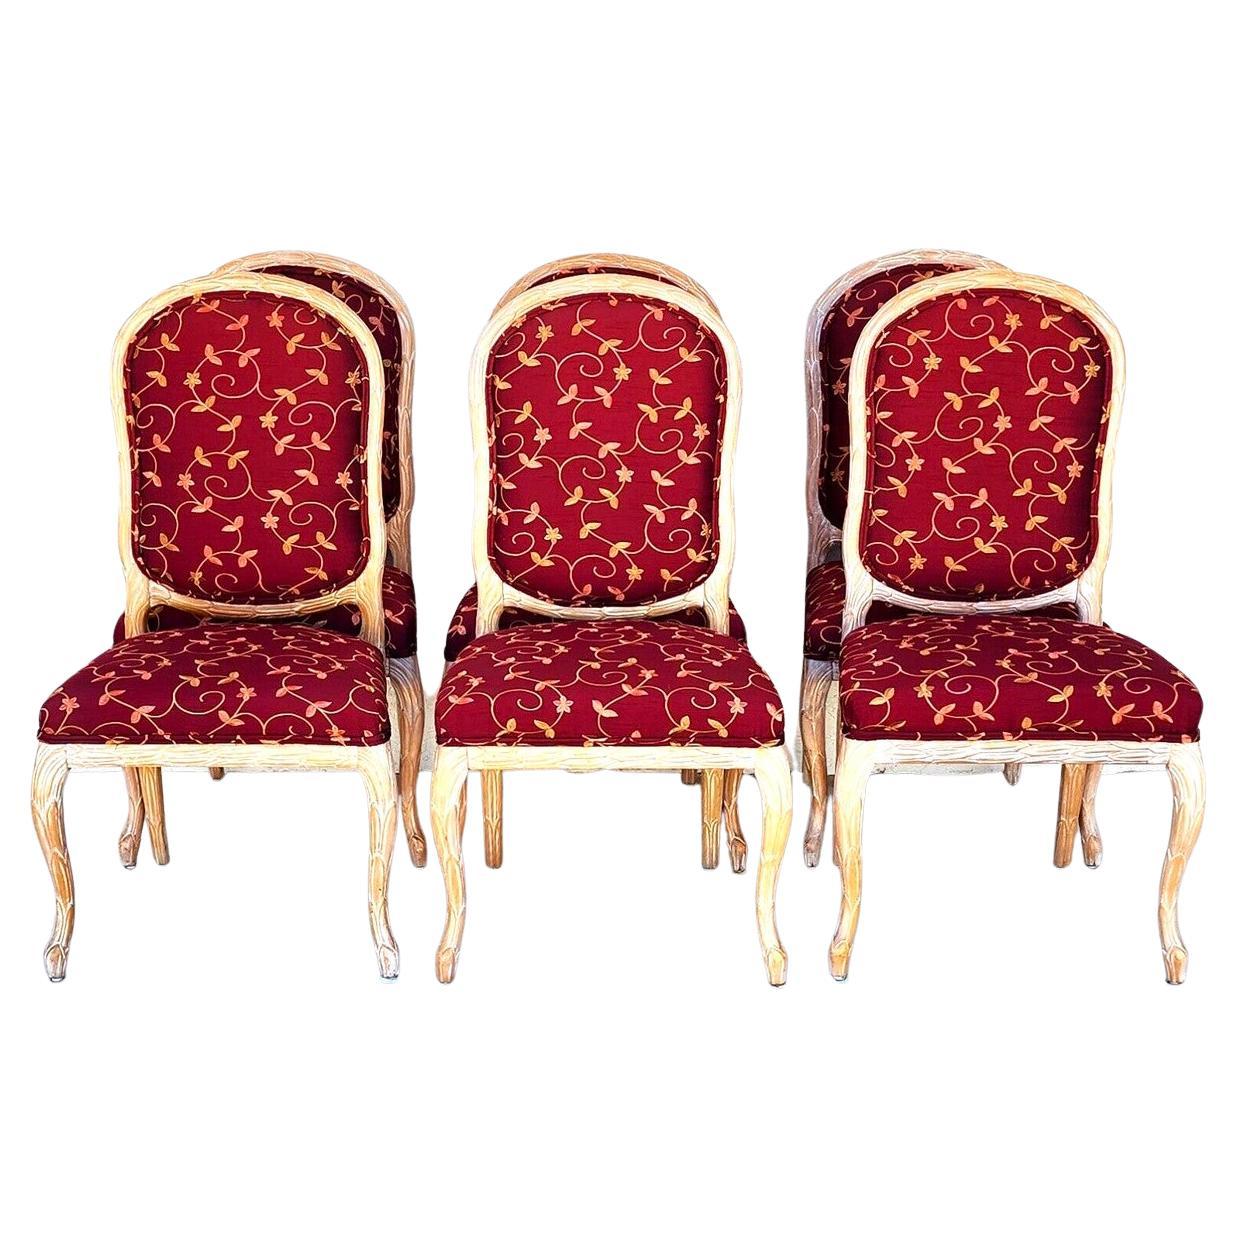 Chateau Dax Dining Chairs Faux Bois Set of 6